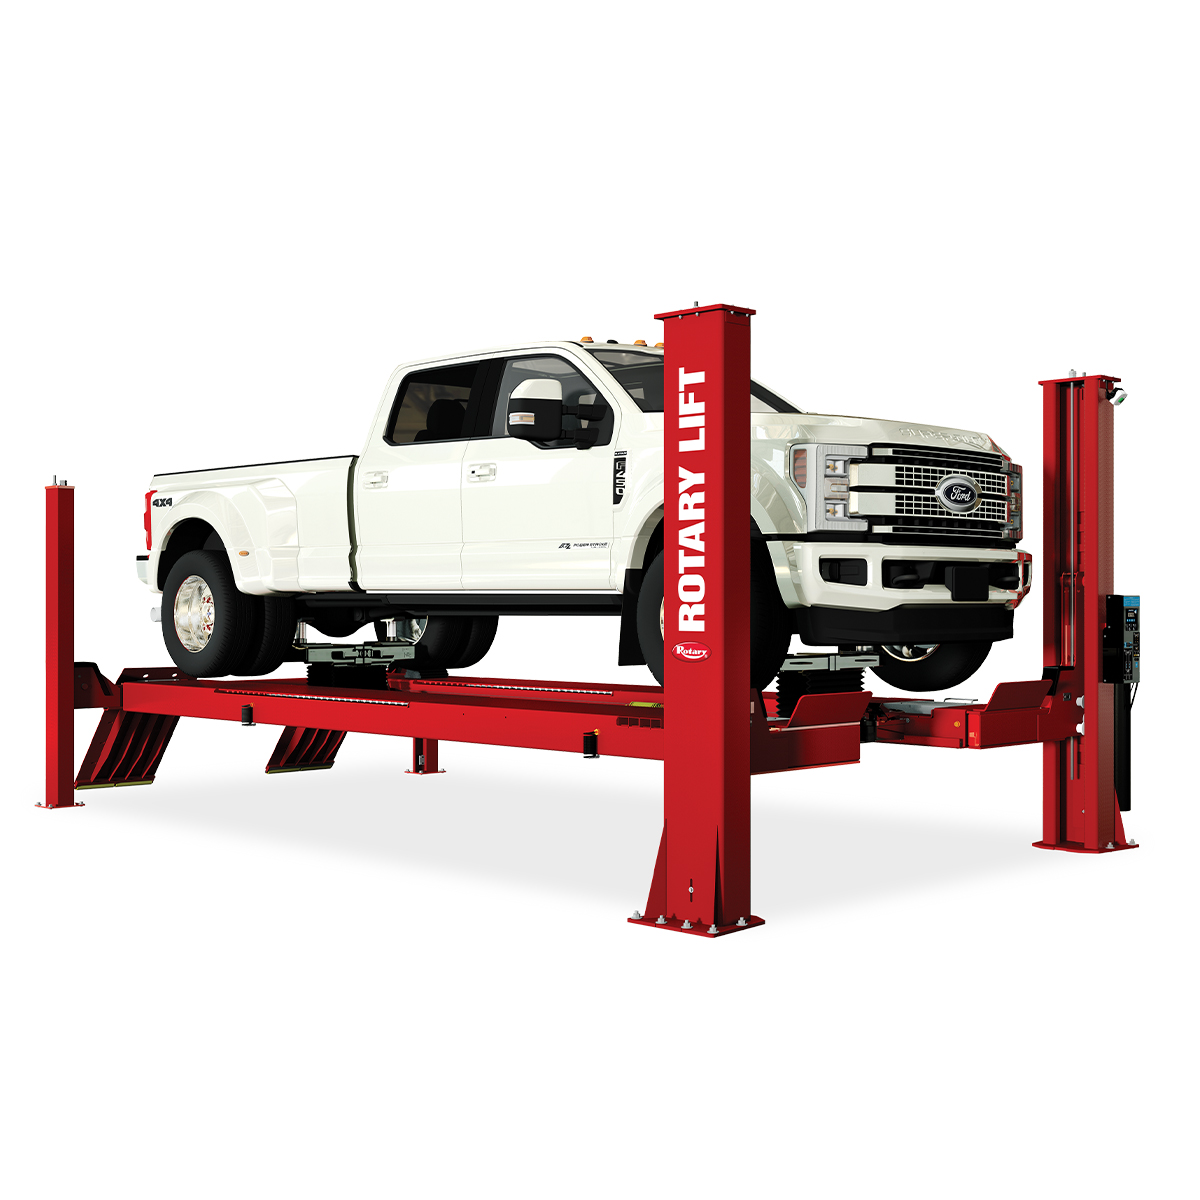 Rotary Lifts - New High Capacity Open Front Four Post Lift -  ARO22N100